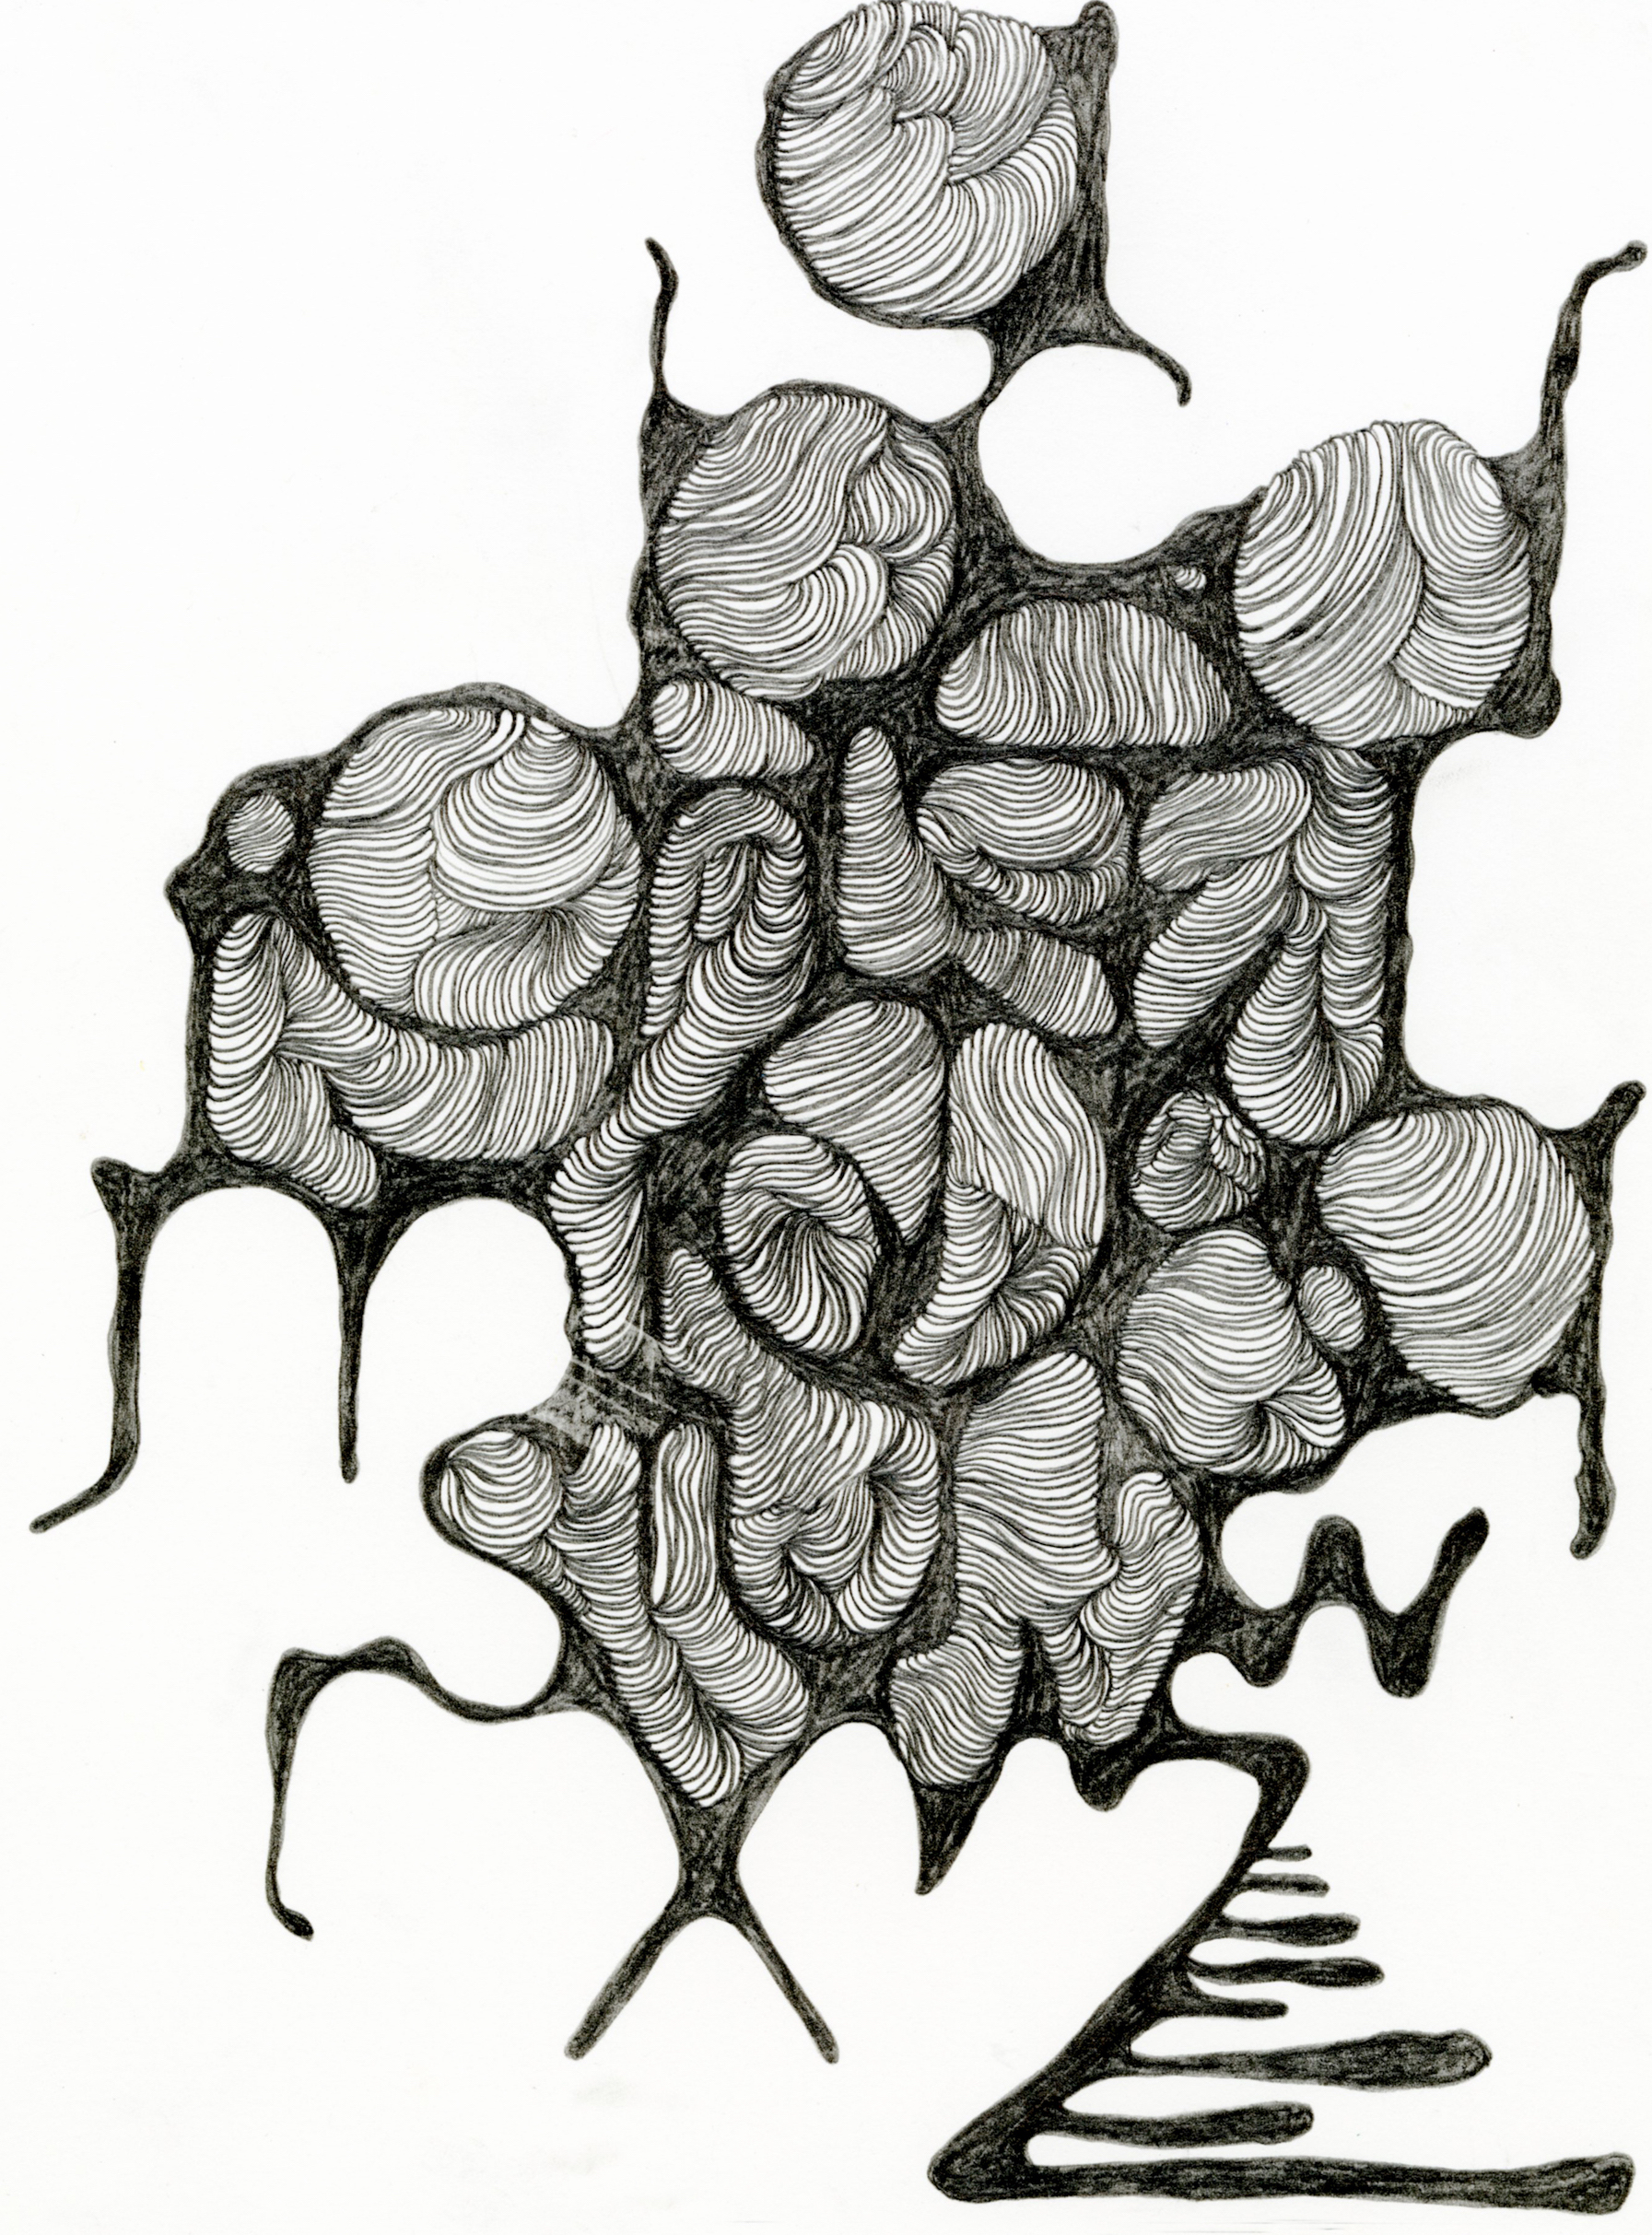    Social Triangle  , 2014 graphite on paper 12×9 inches 